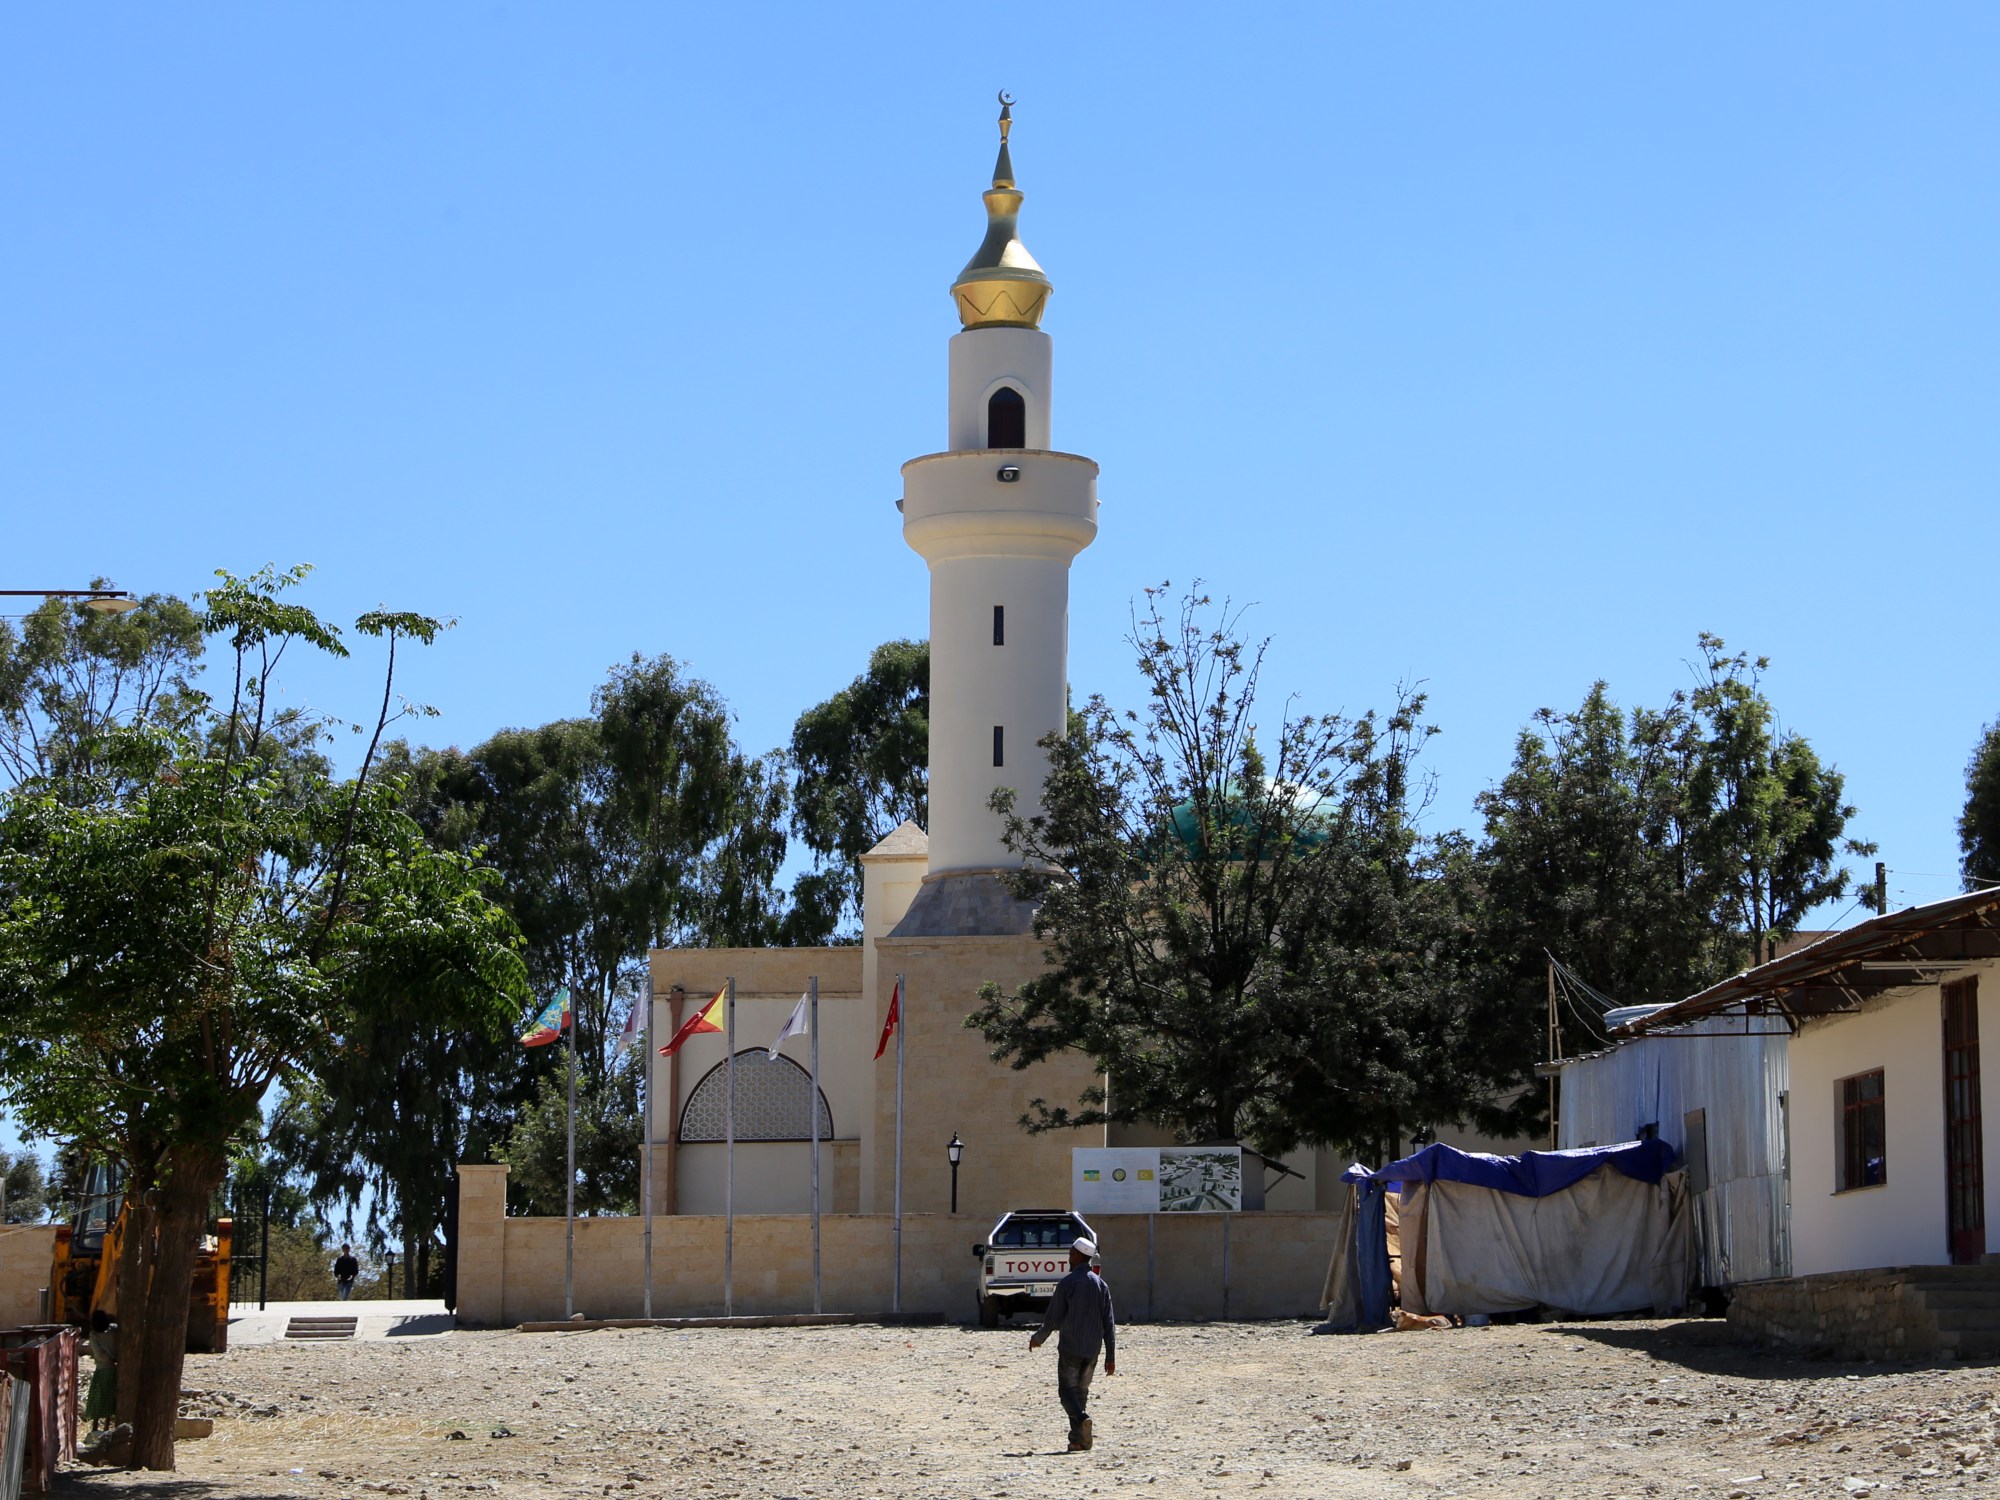 The mosque, pictured here in 2018, was first built in the 7th century (Wikicommons/Sailko)